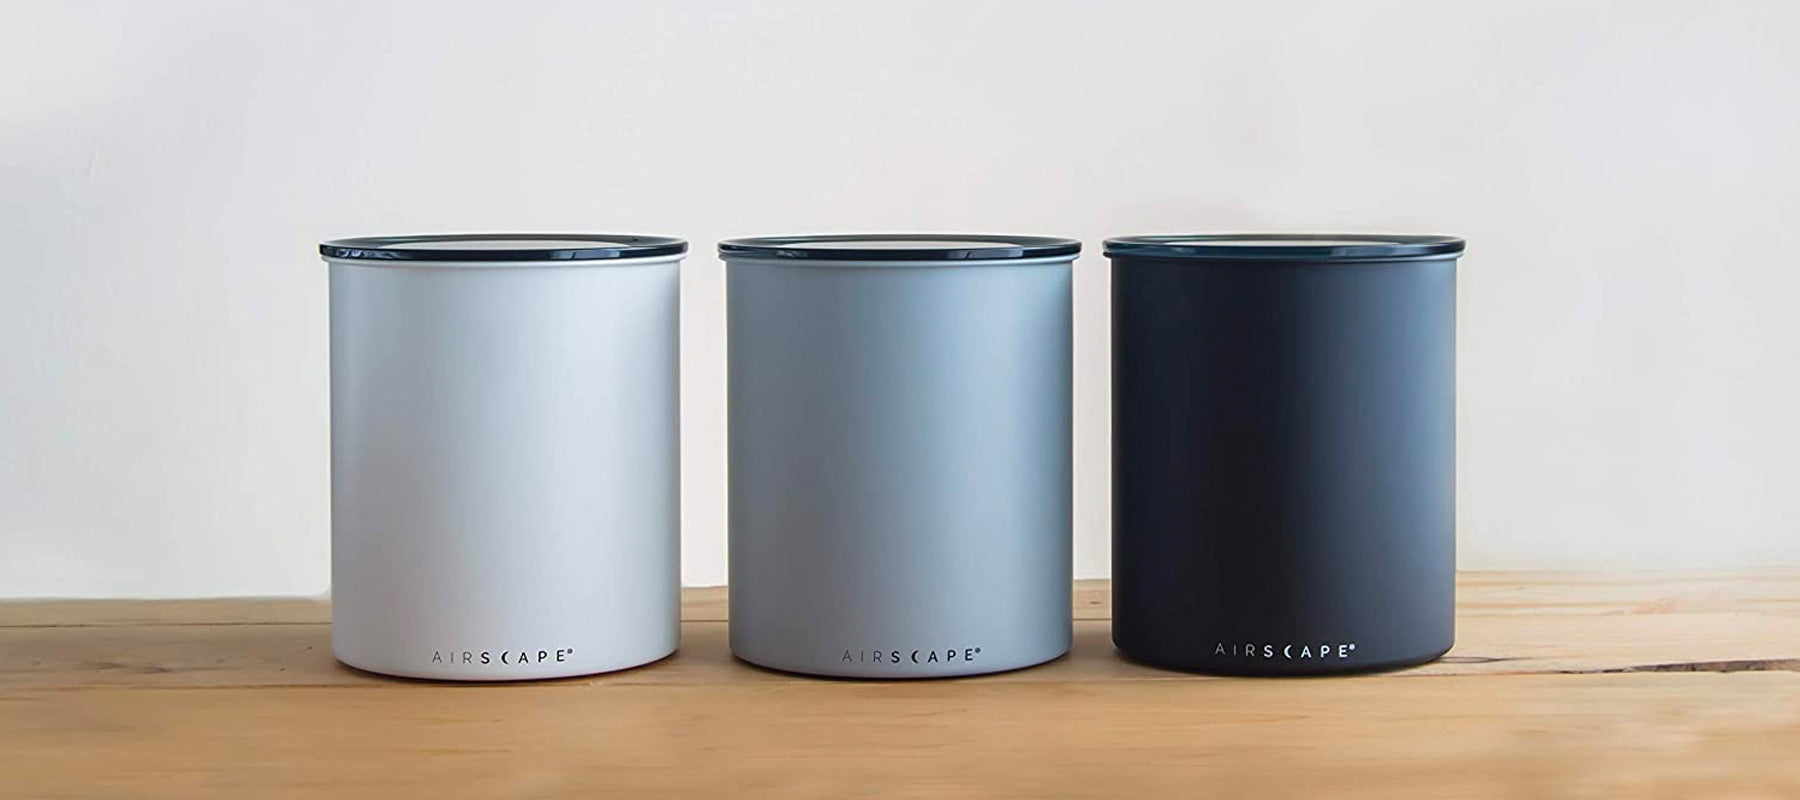 Airscape Coffee Cannisters